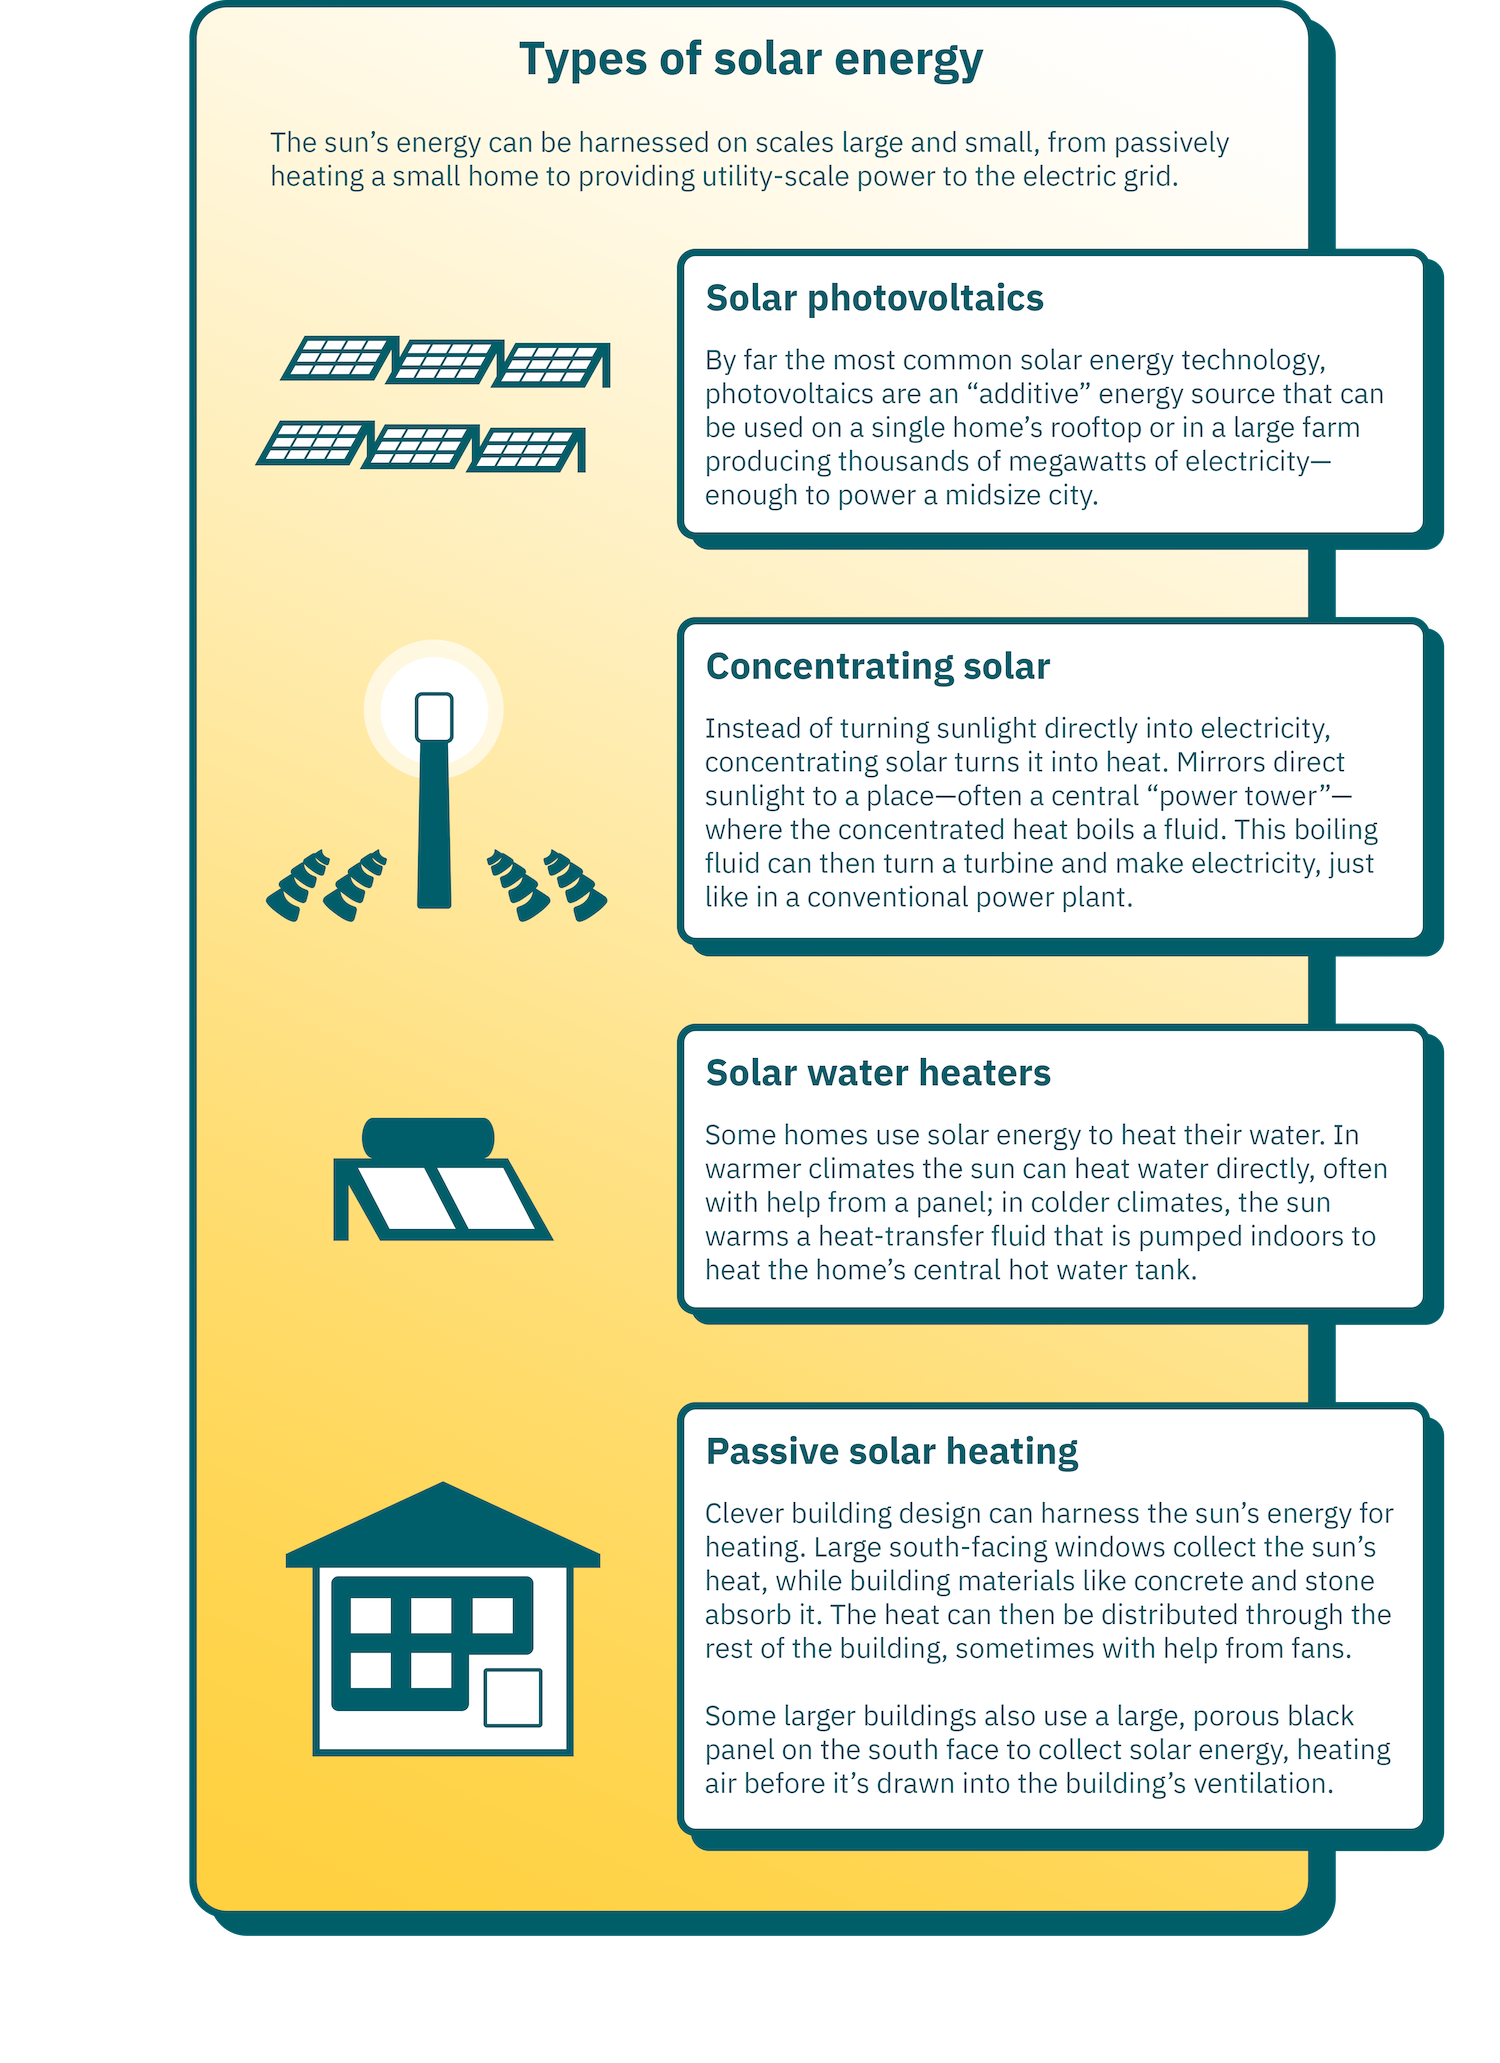 Types of solar energy: The sun’s energy can be harnessed on scales large and small, from passively heating a small home to providing utility-scale power to the electric grid.